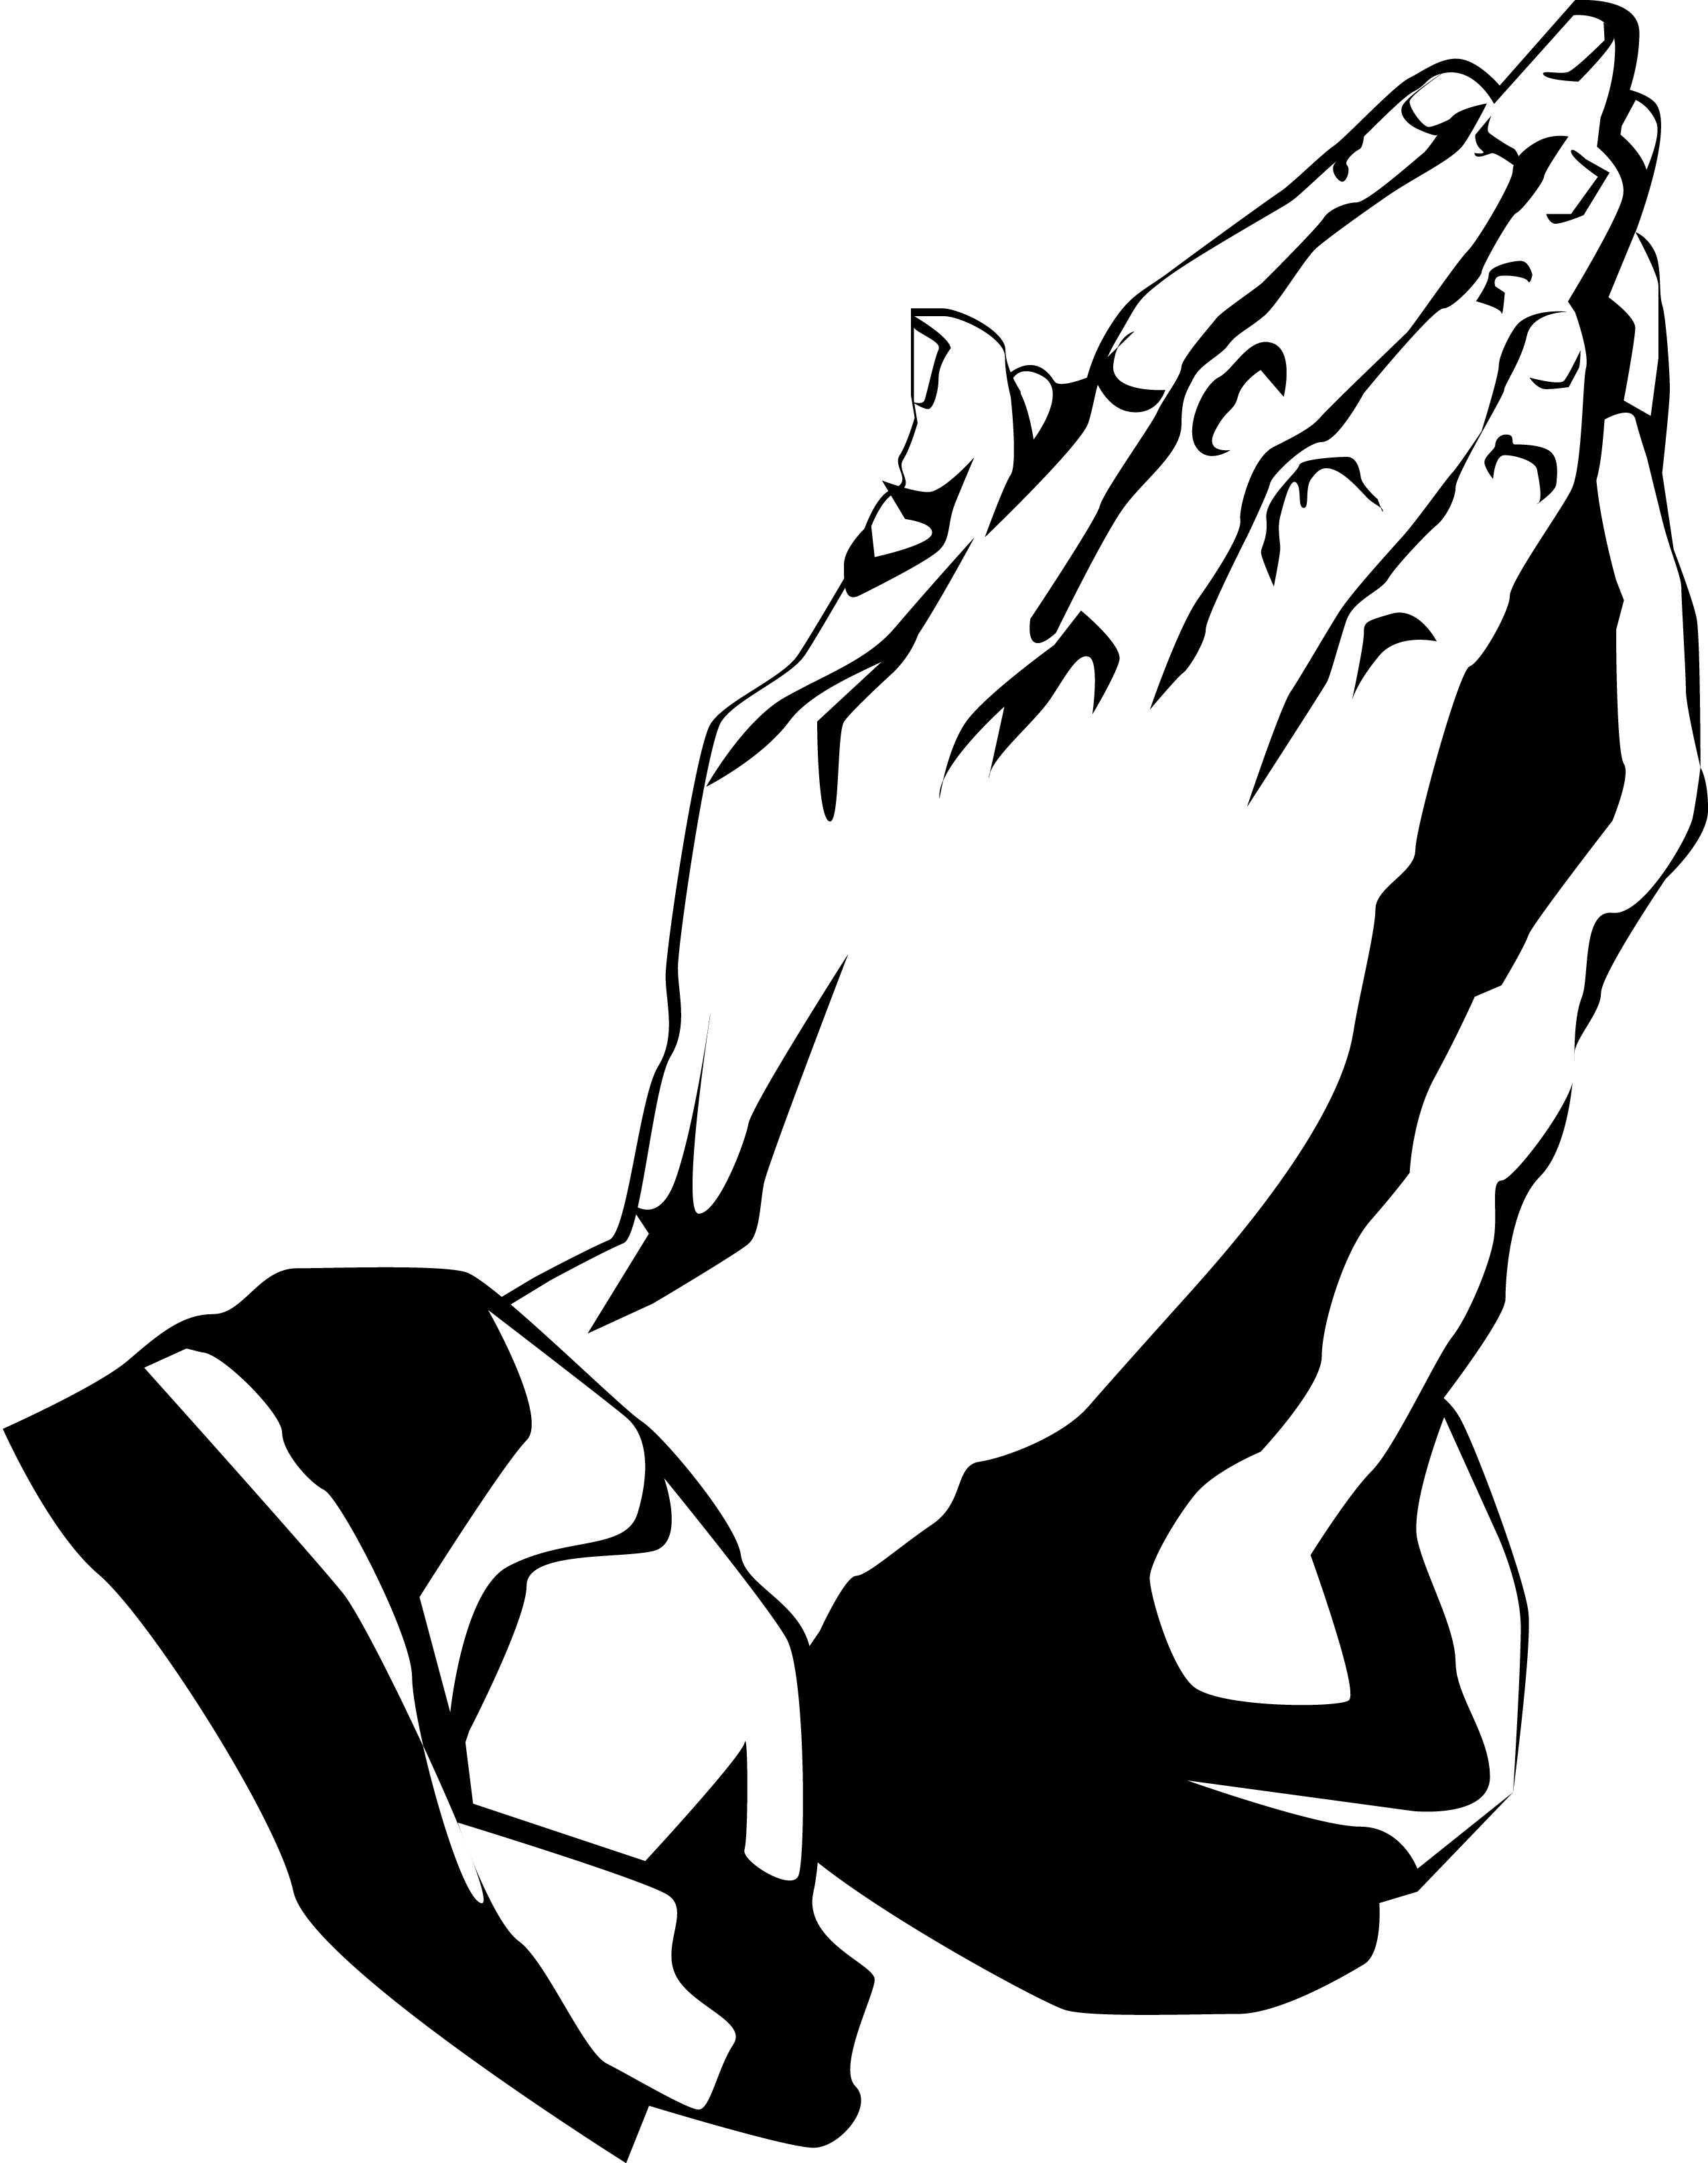 Hands Praying Drawing | Free download on ClipArtMag